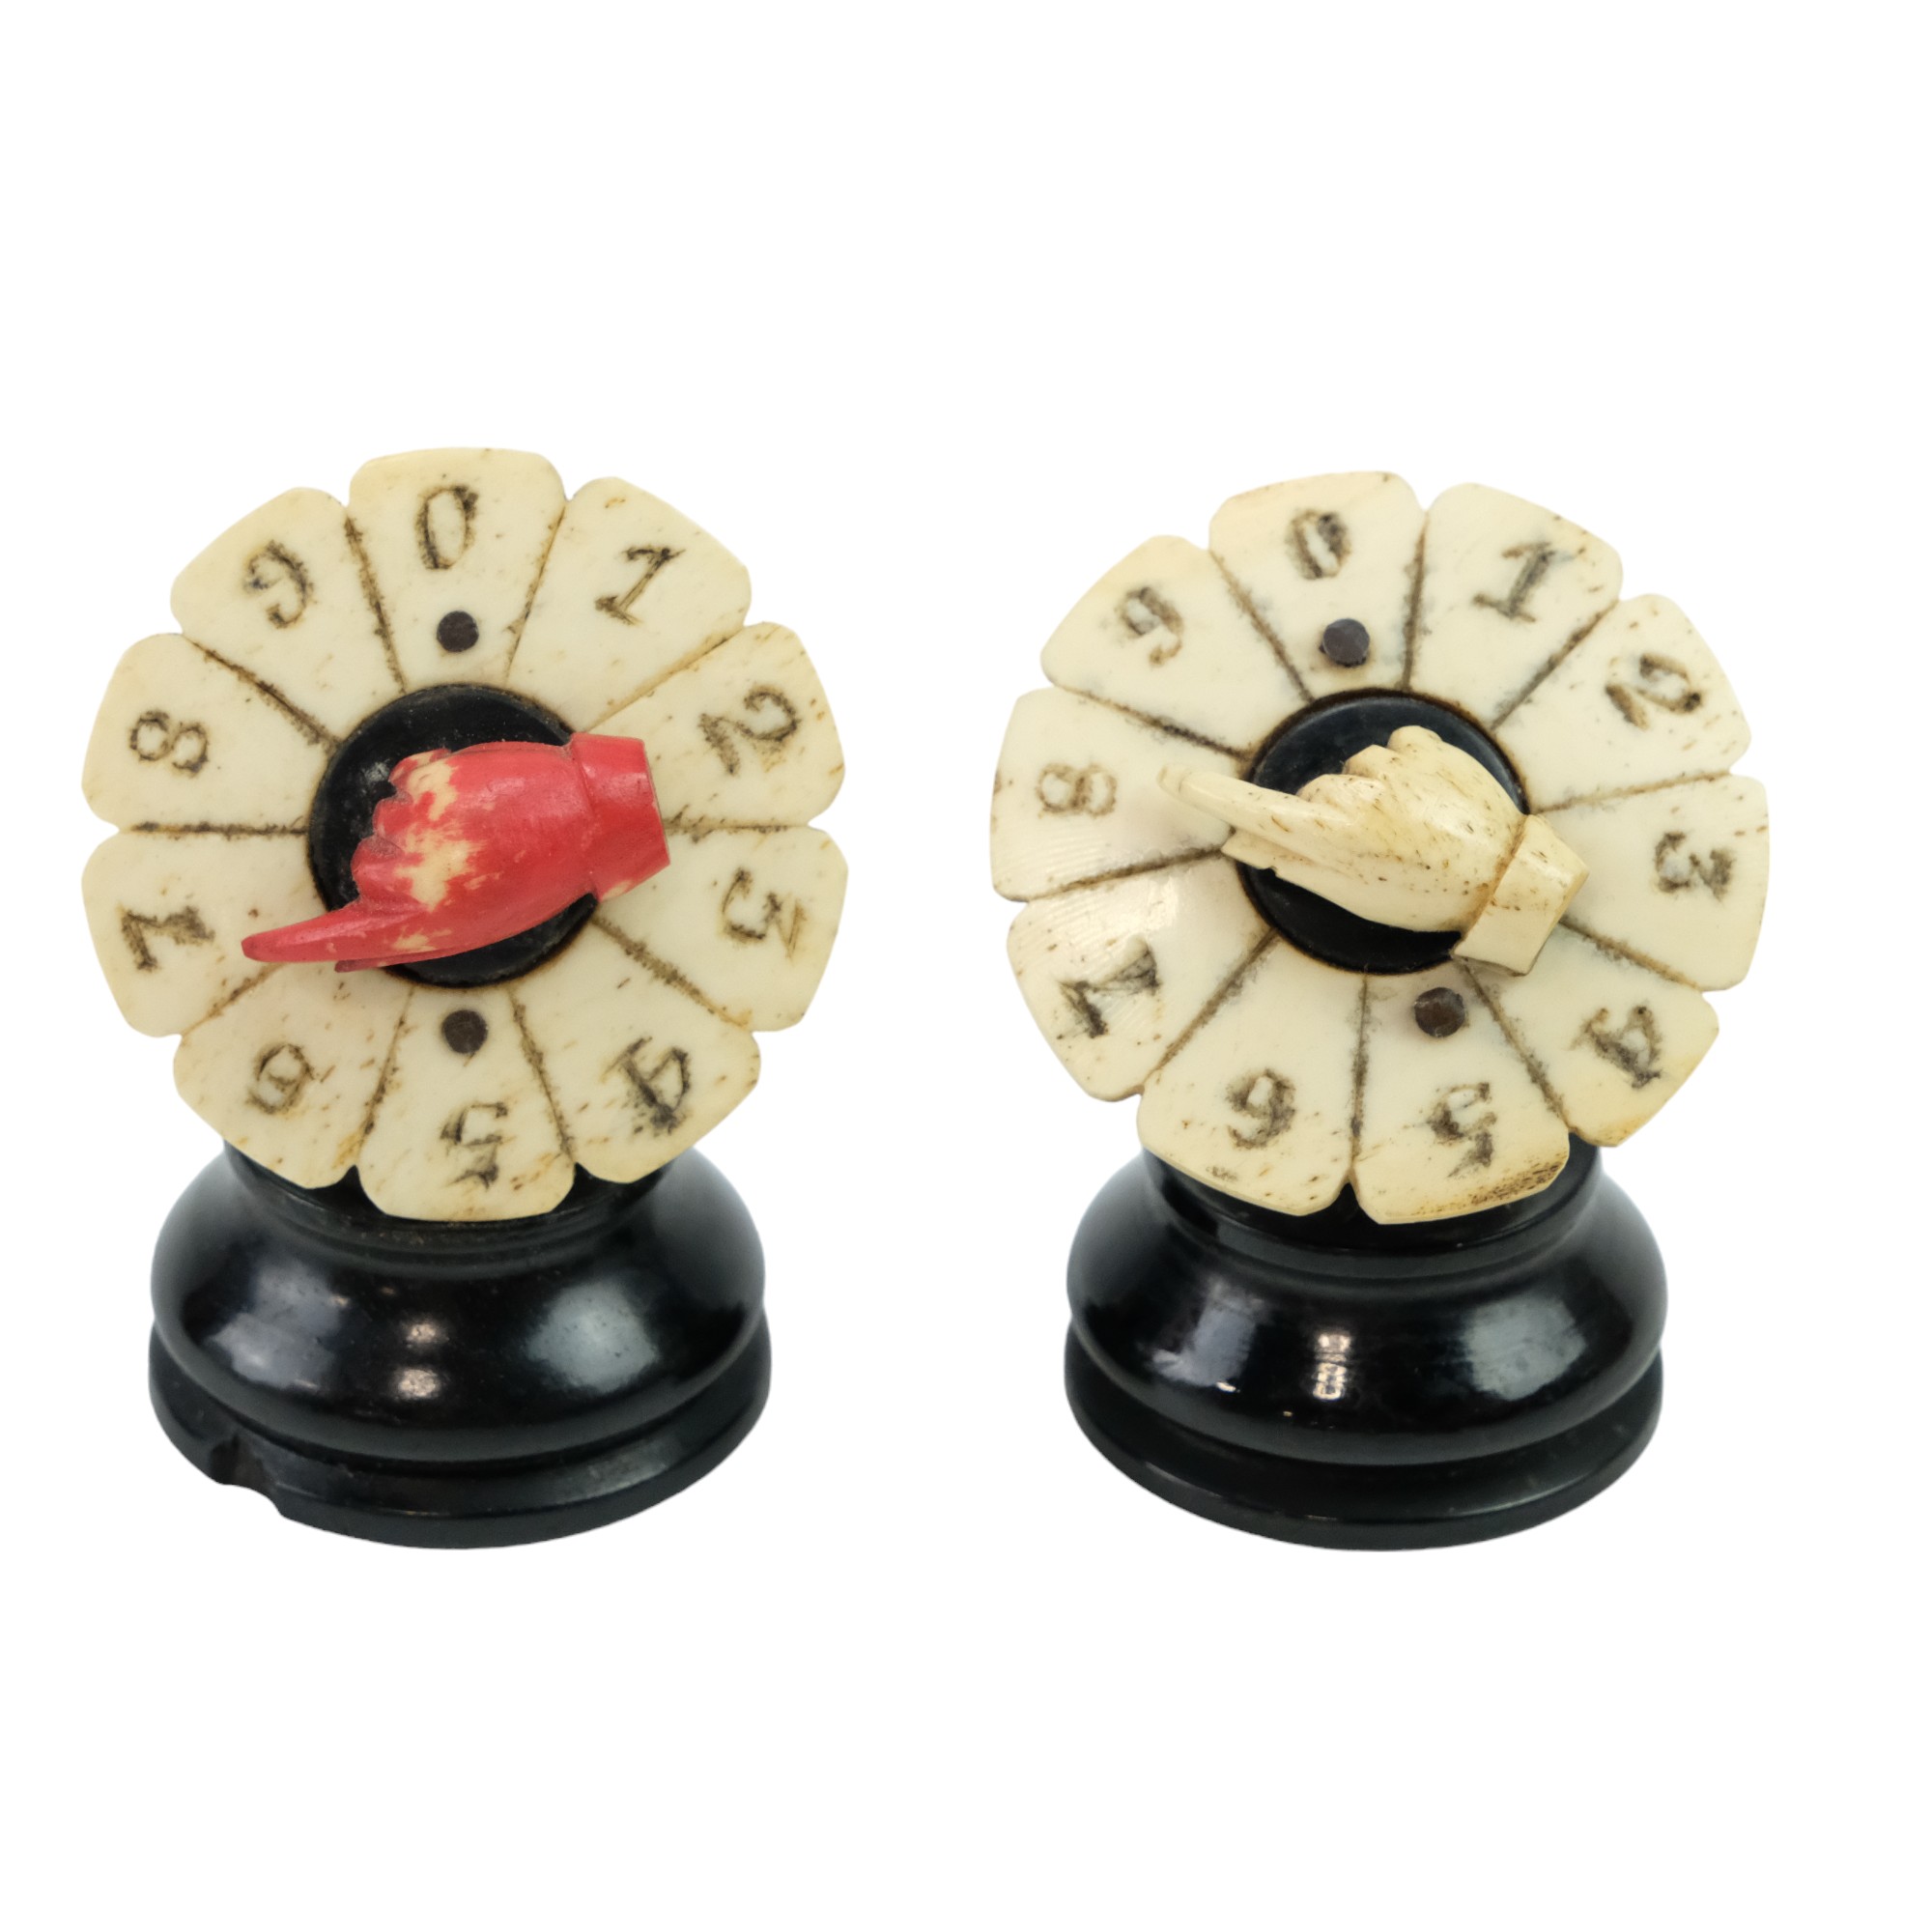 A pair of Victorian bone and ebony game score counters, 5 cm